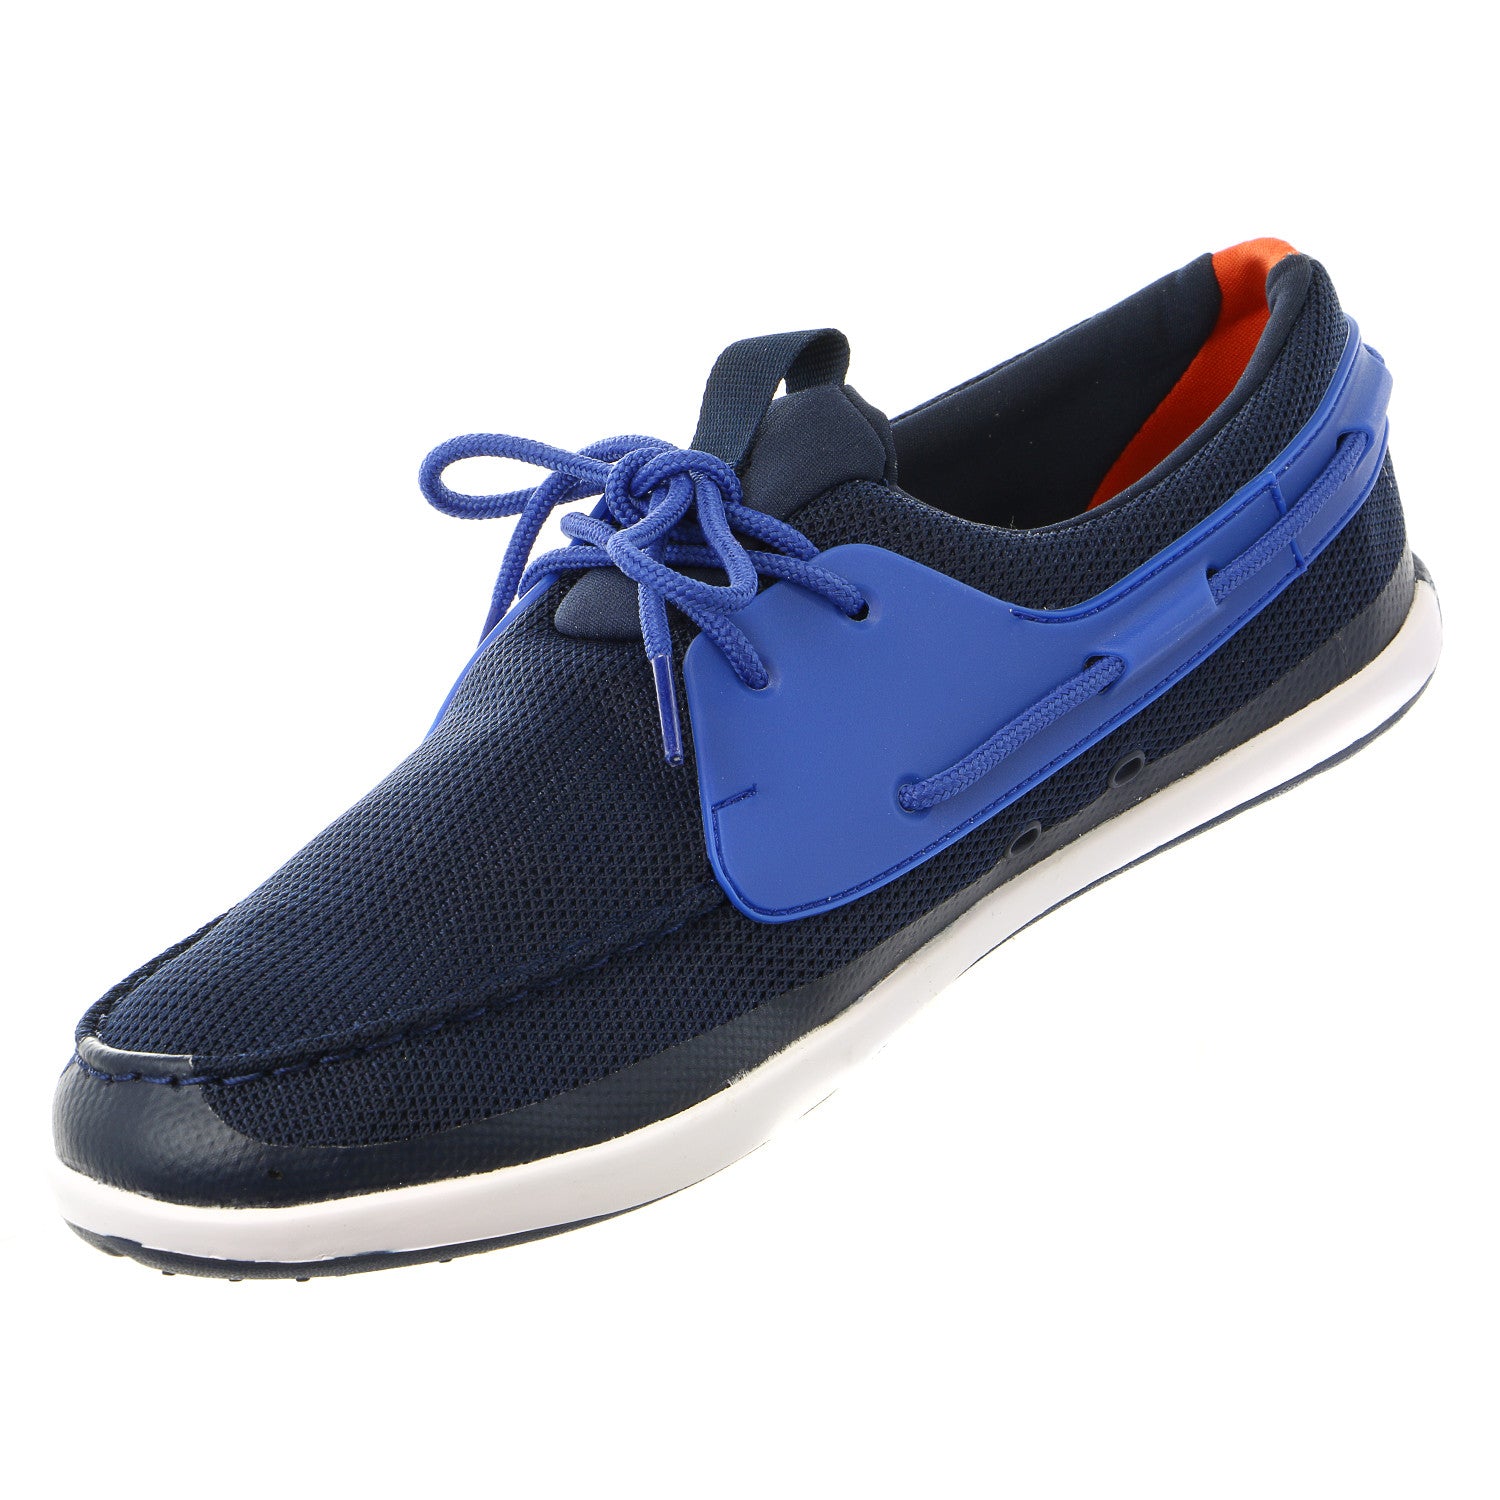 Lacoste L.Andsailing 1 Fashion Moccasin Boat Shoe - Mens - Shoplifestyle